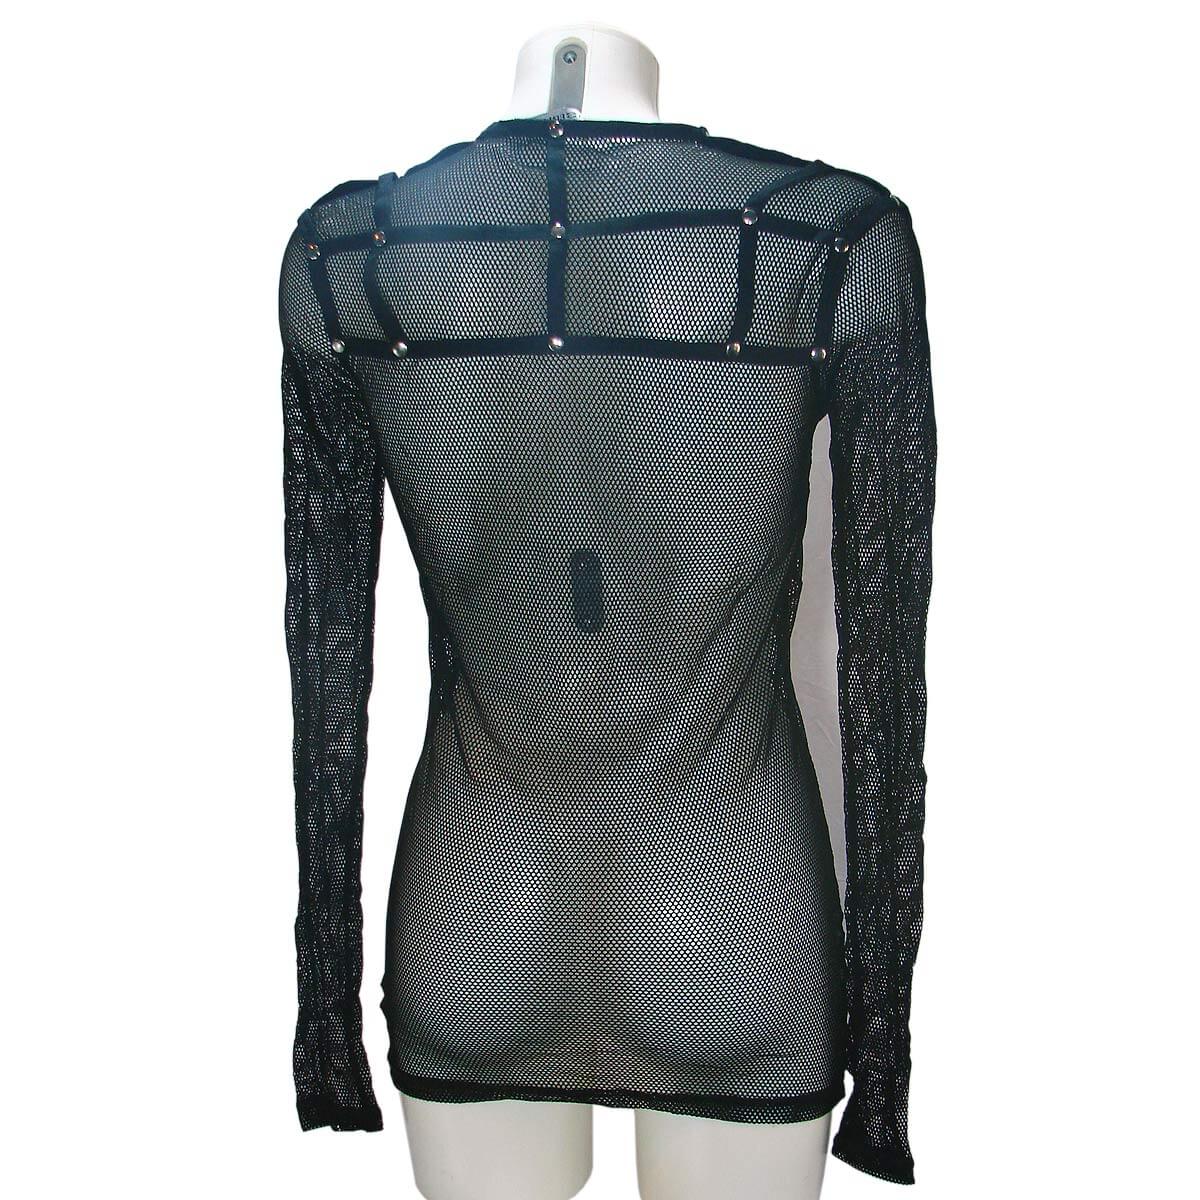 Black fishnet long sleeve shirt By Lip Service – Another Way of Life